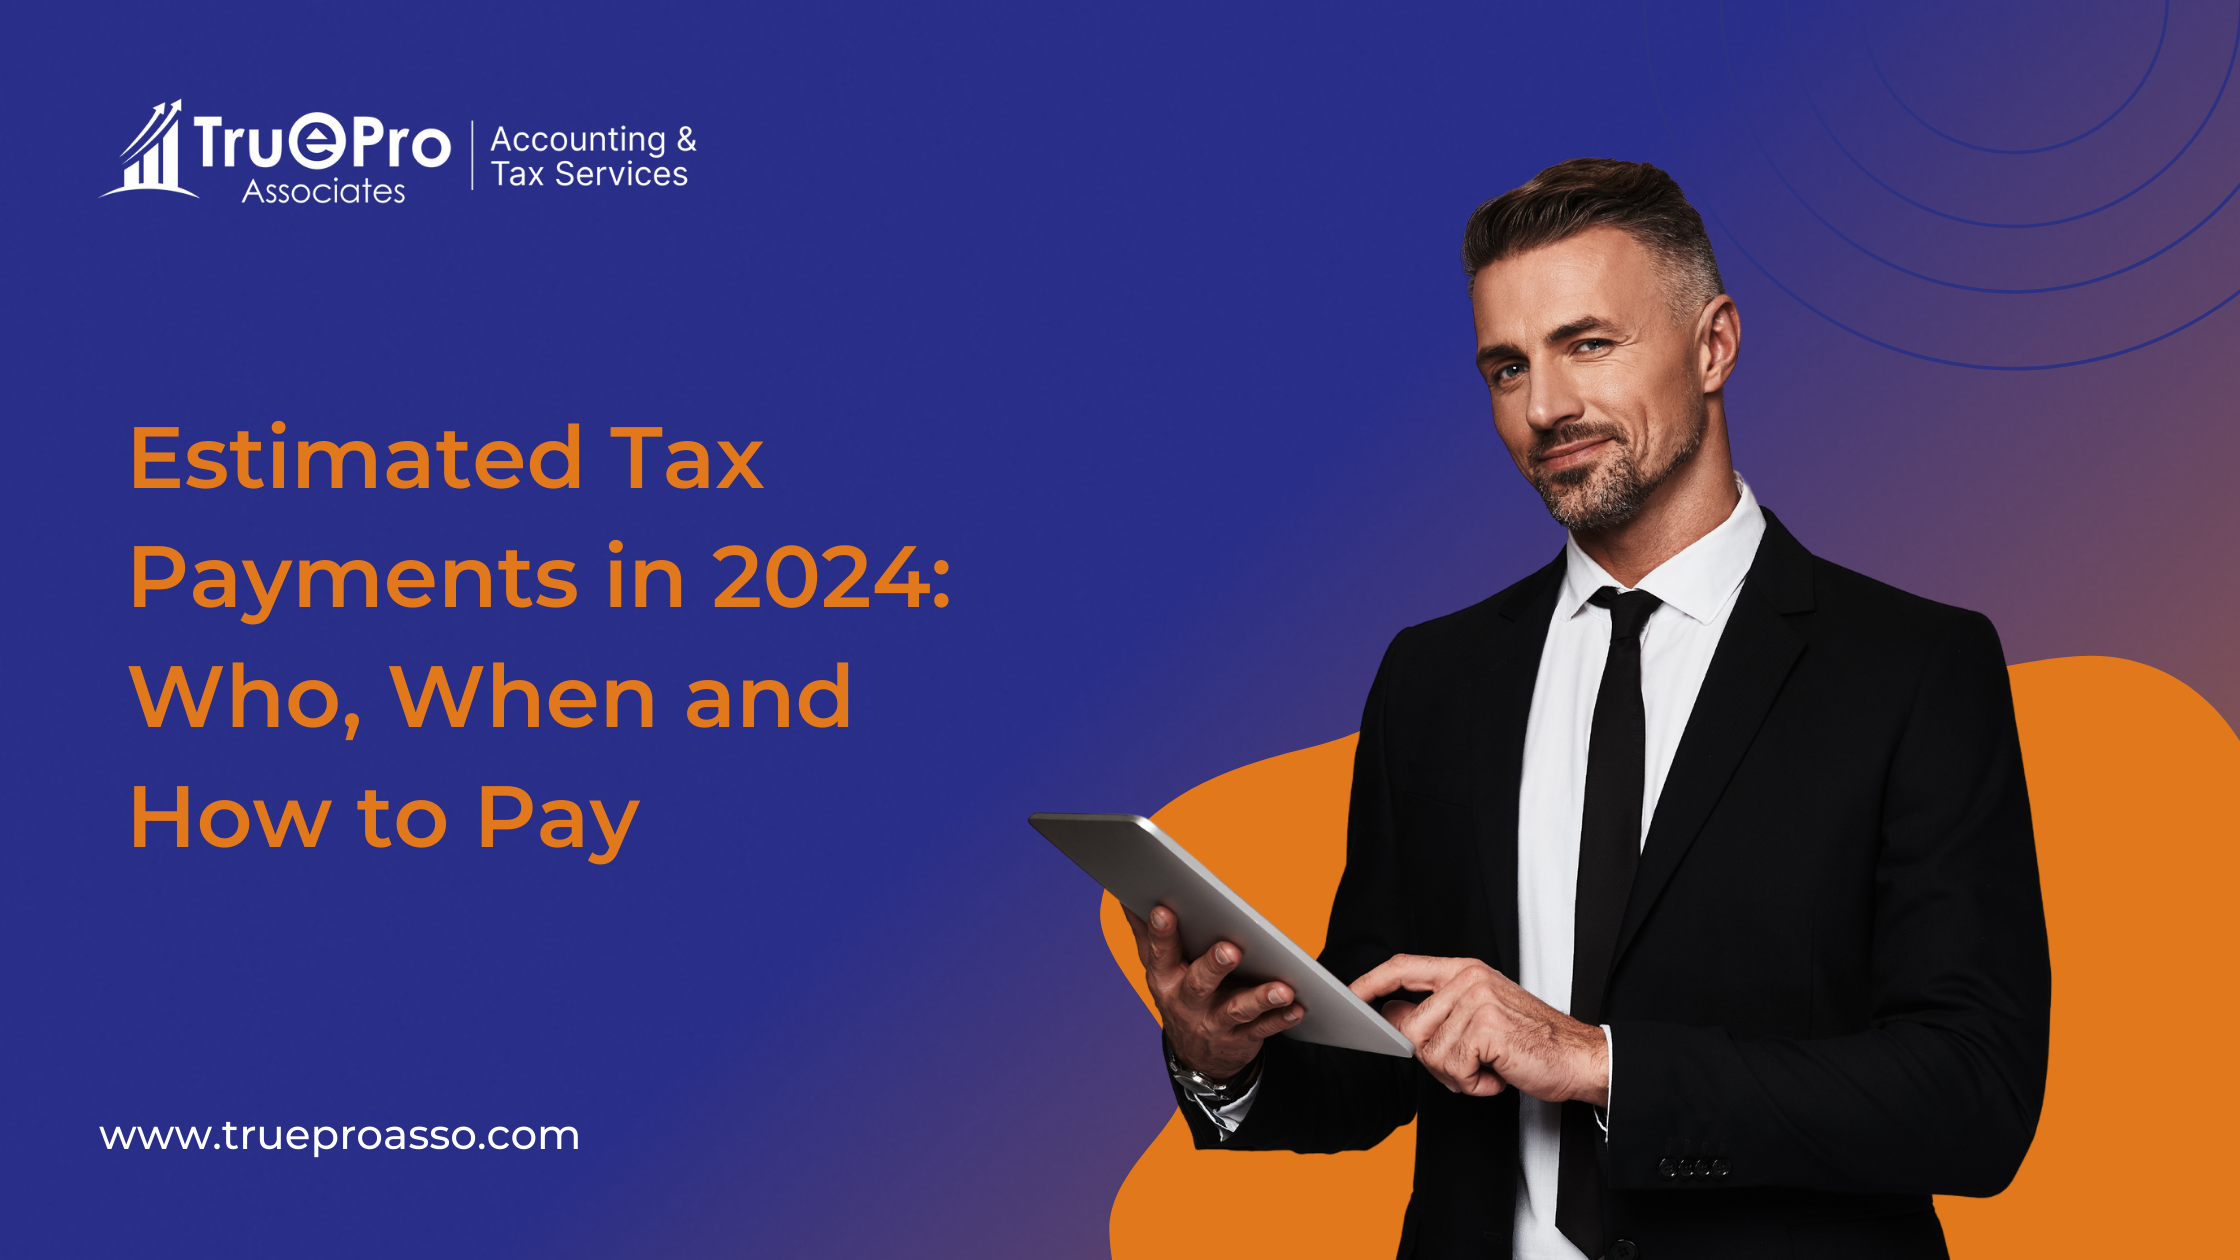 Estimated Tax Payments in 2024